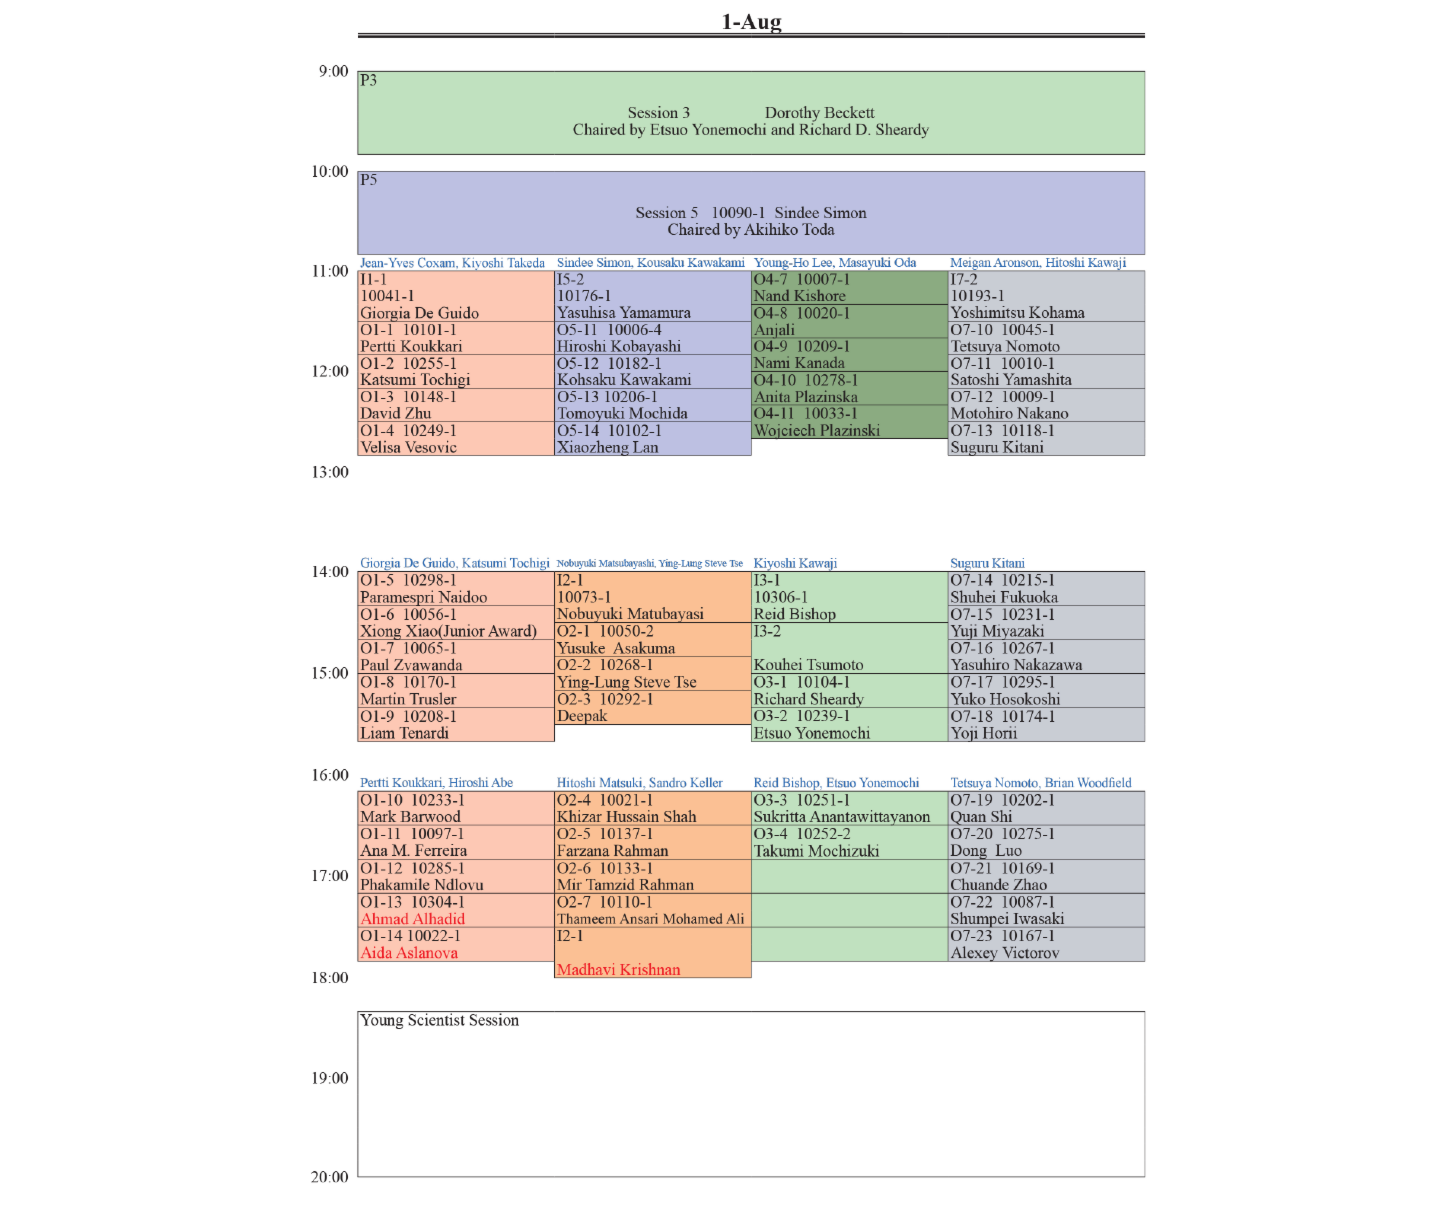 Table_Schedule_ICCT_2i (1)_1_2.png